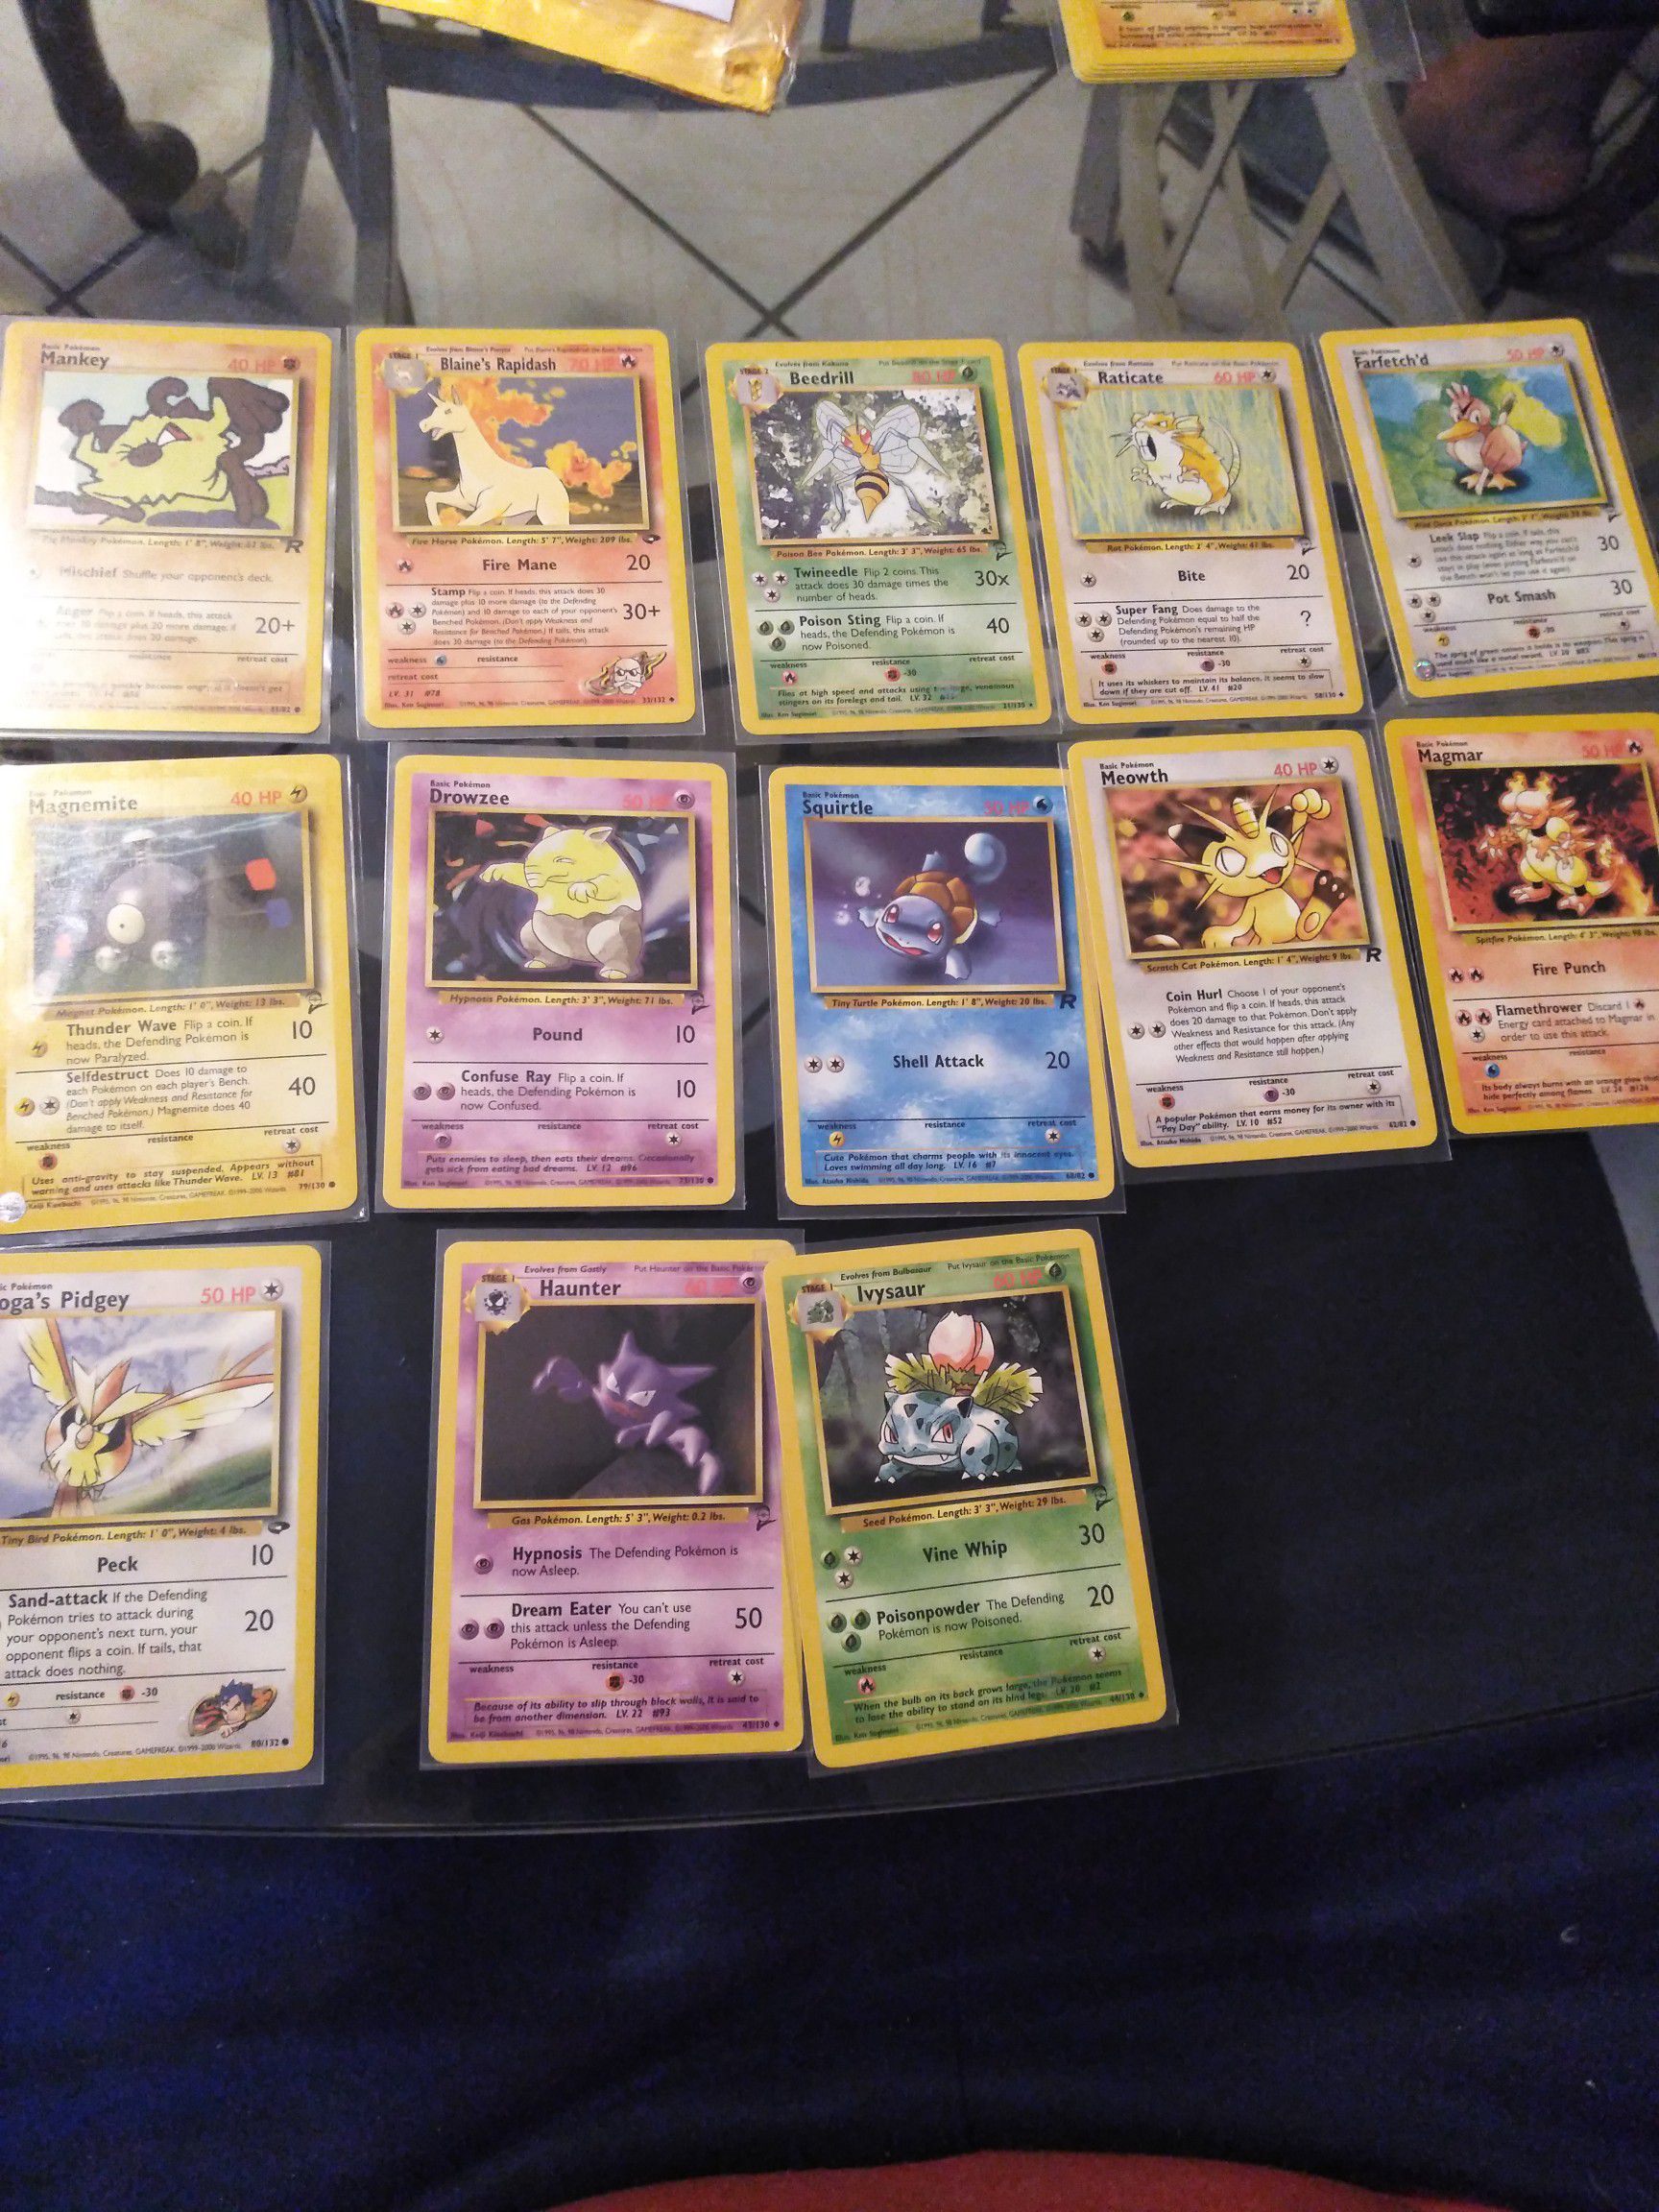 Random Pokemon cards from different sets